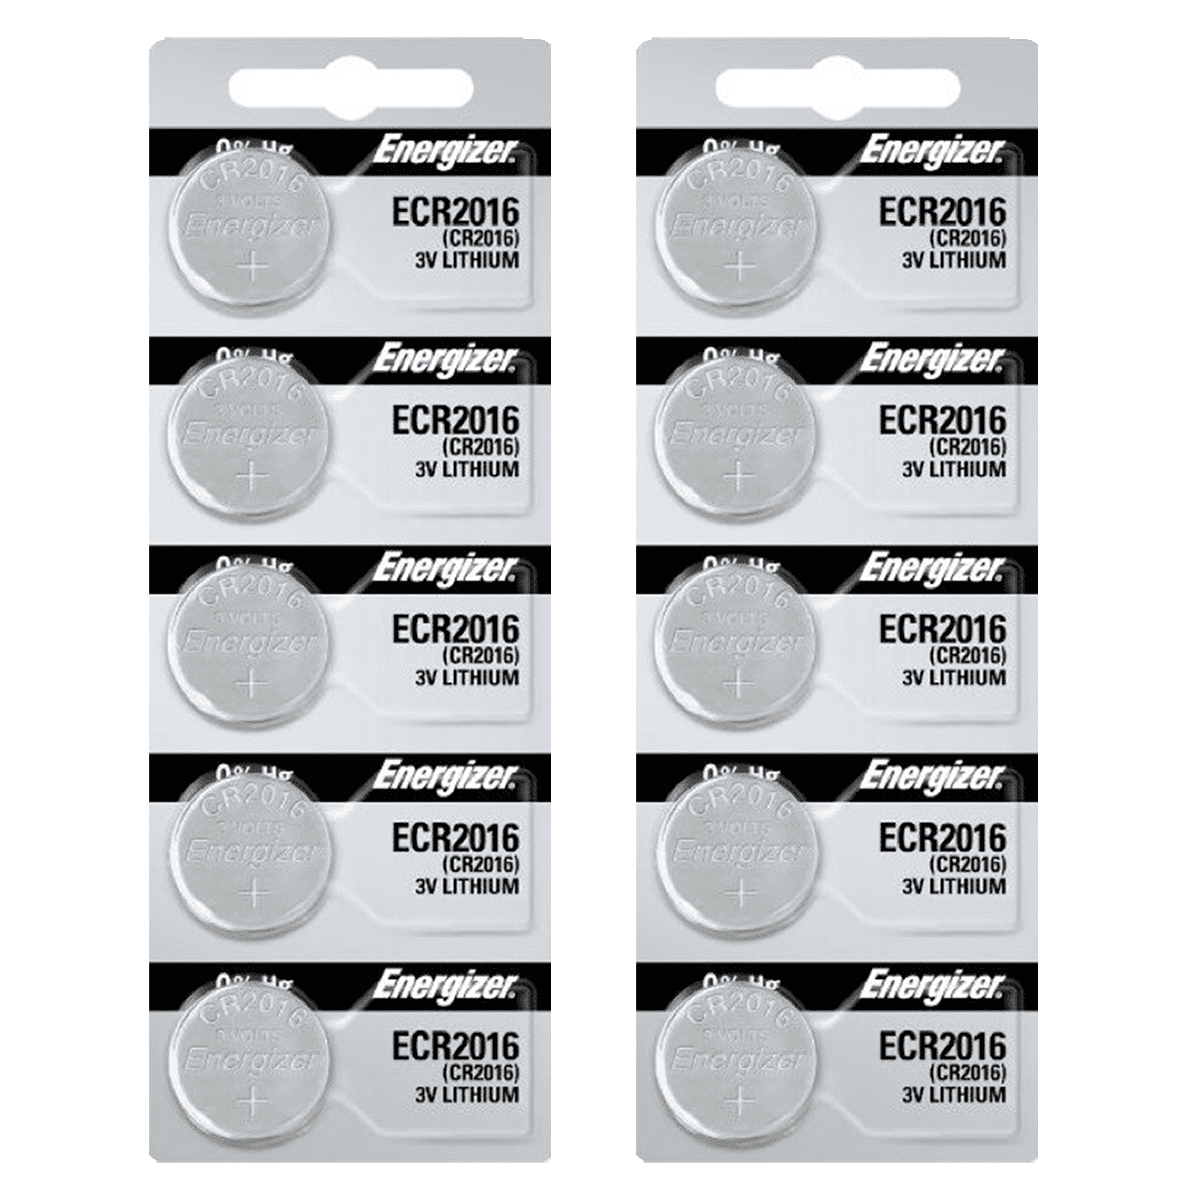 Energizer CR2016 3V Lithium Coin Cell Battery (10 Count) 